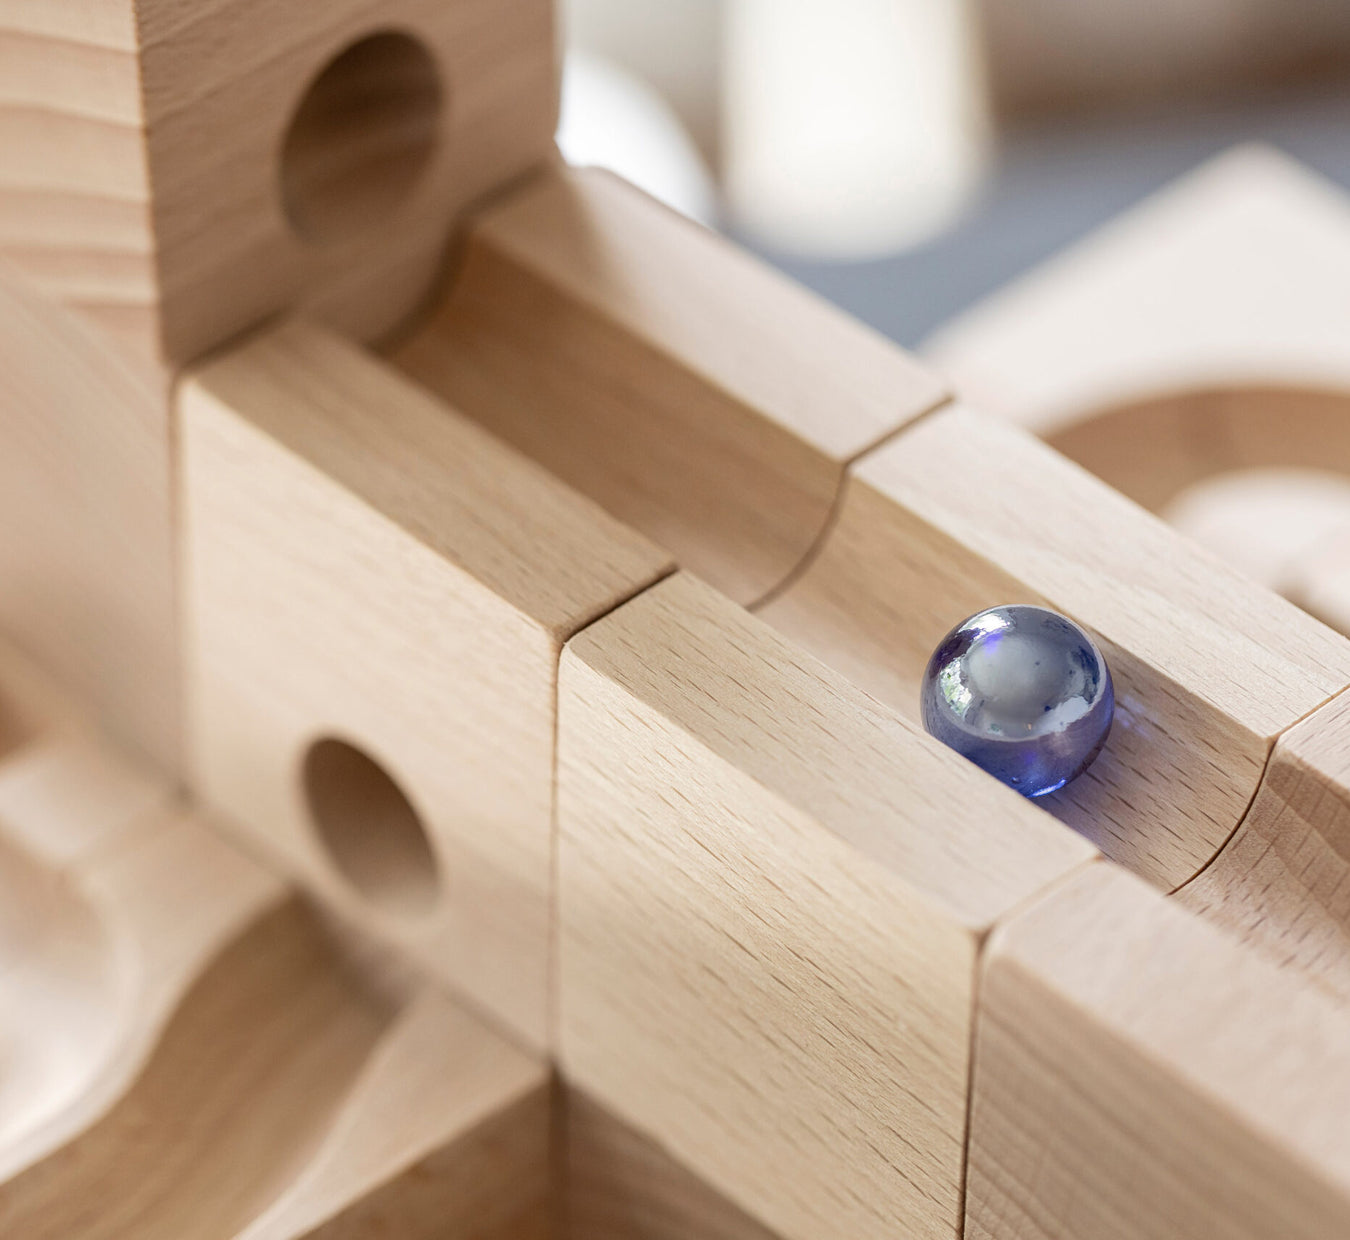 Wooden blocks with smooth channels cut for marbles to pass thought, blue marble runs down a ramp